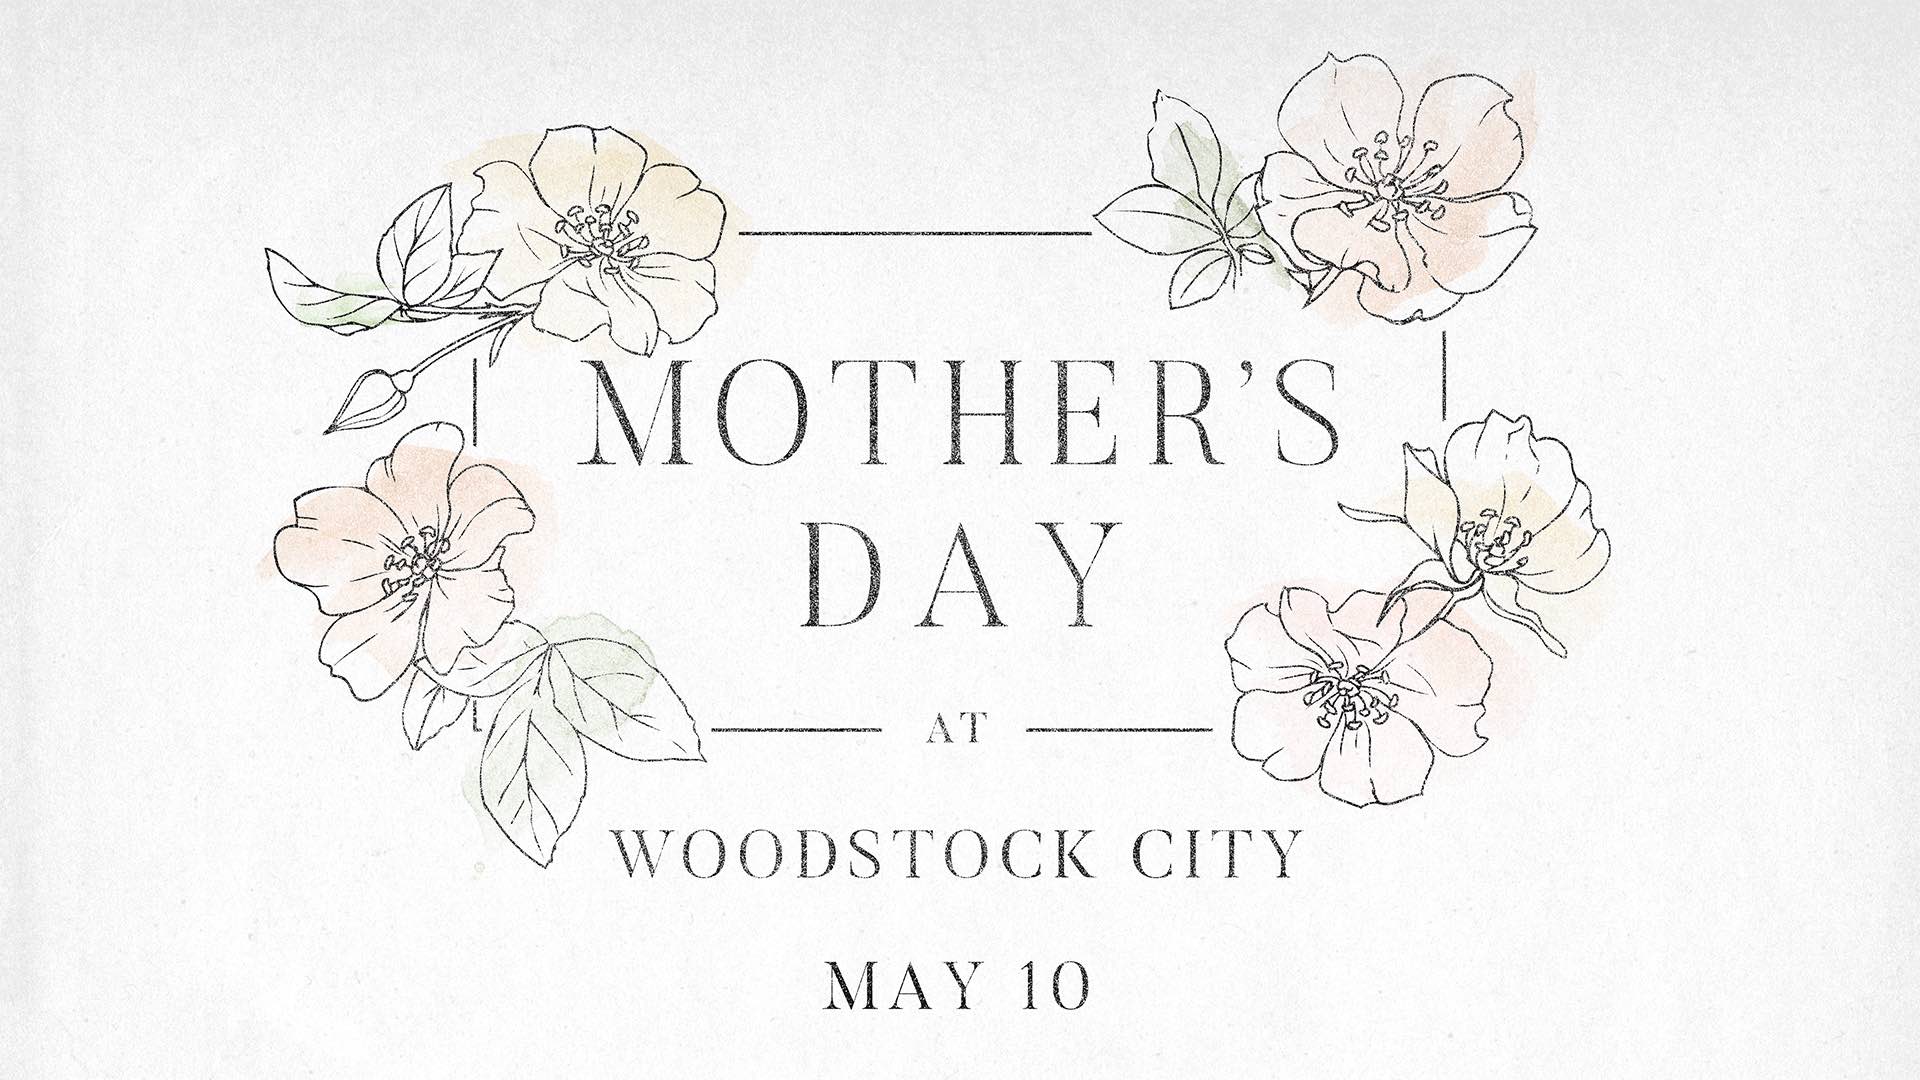 Mother's Day at Woodstock City